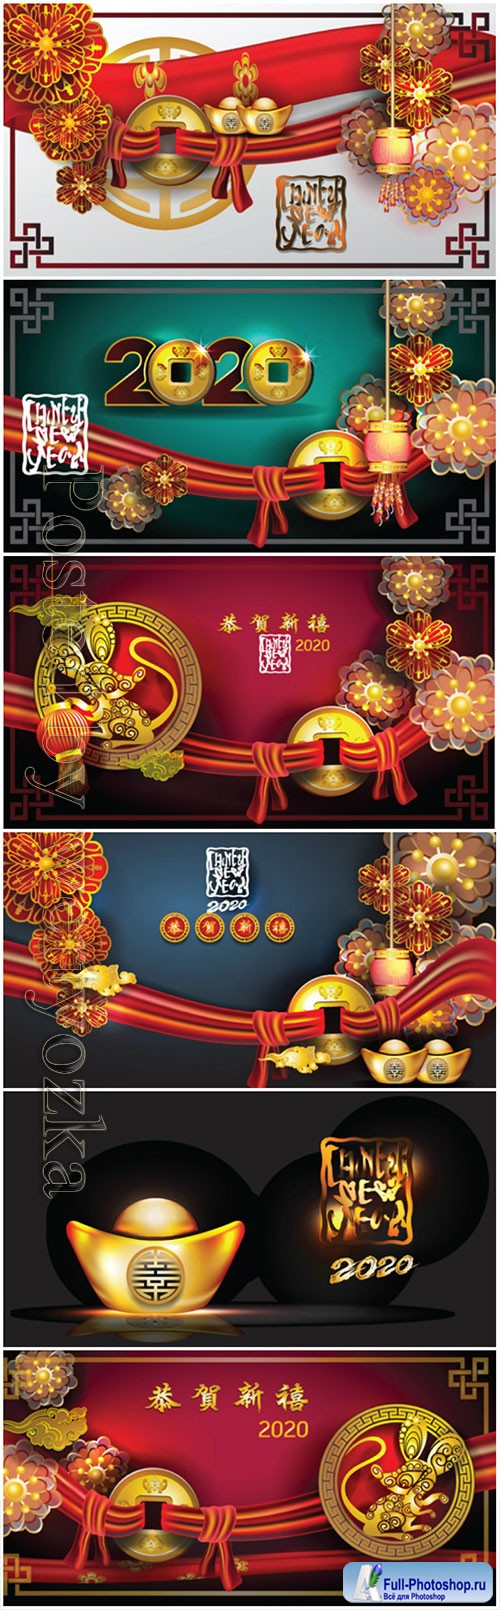 Happy chinese new year 2020, holiday vector with year of rat # 4